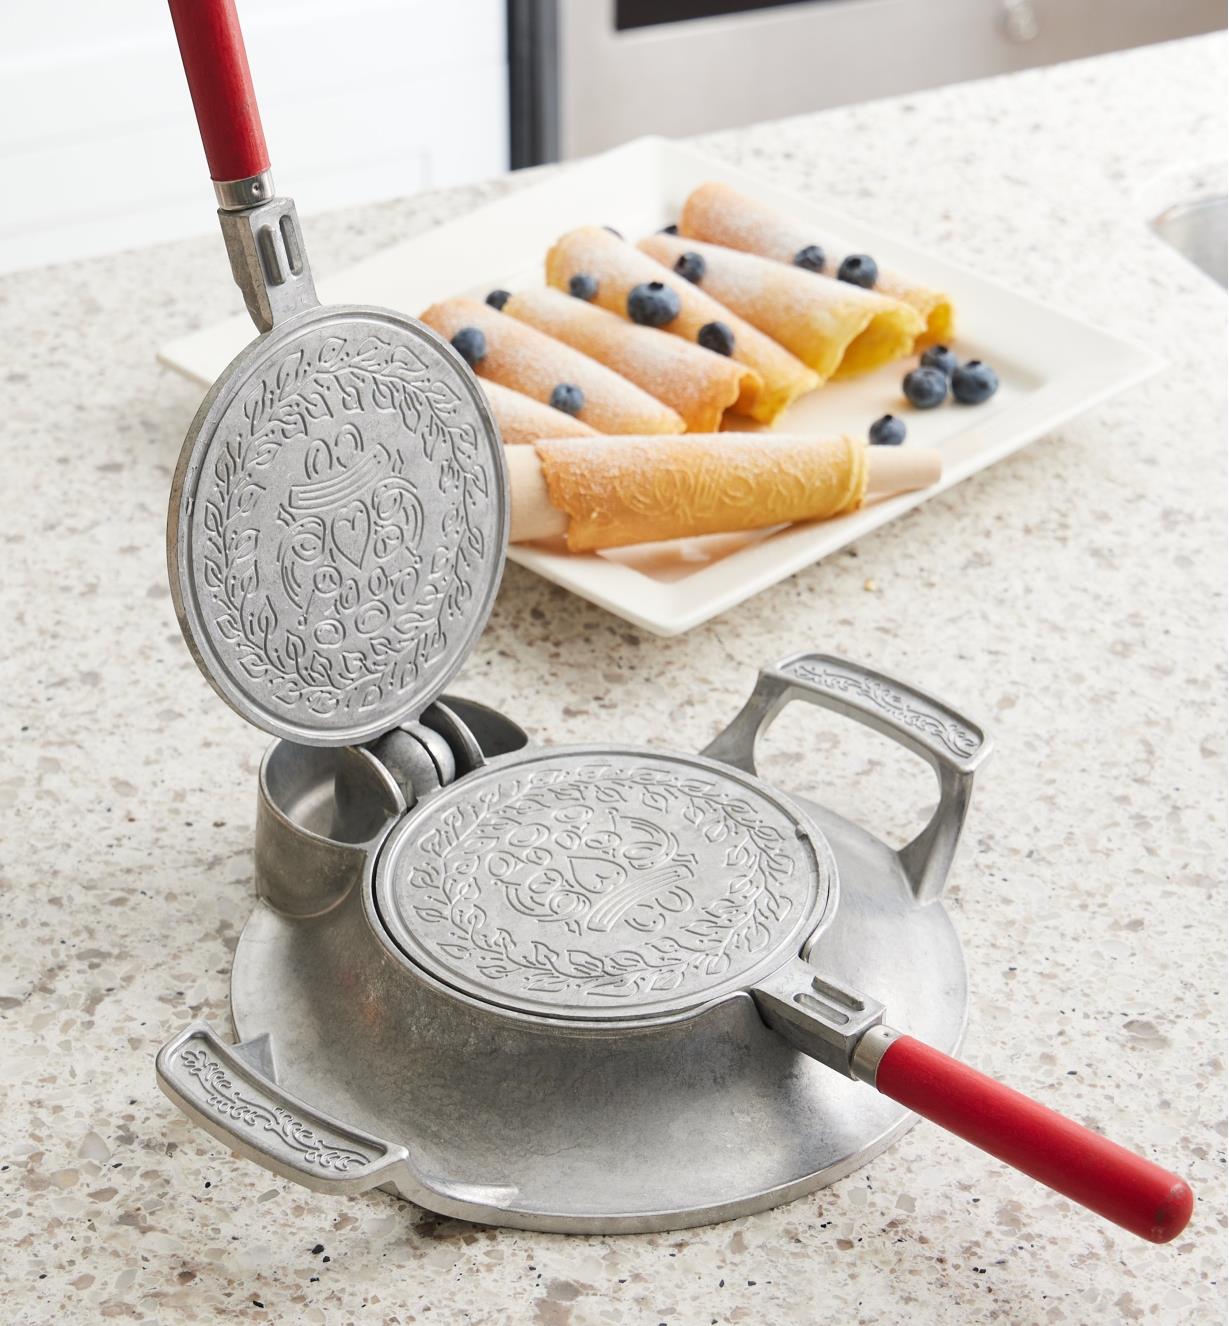 The krumkake and pizzelle iron with open griddle plates showing the embossed design